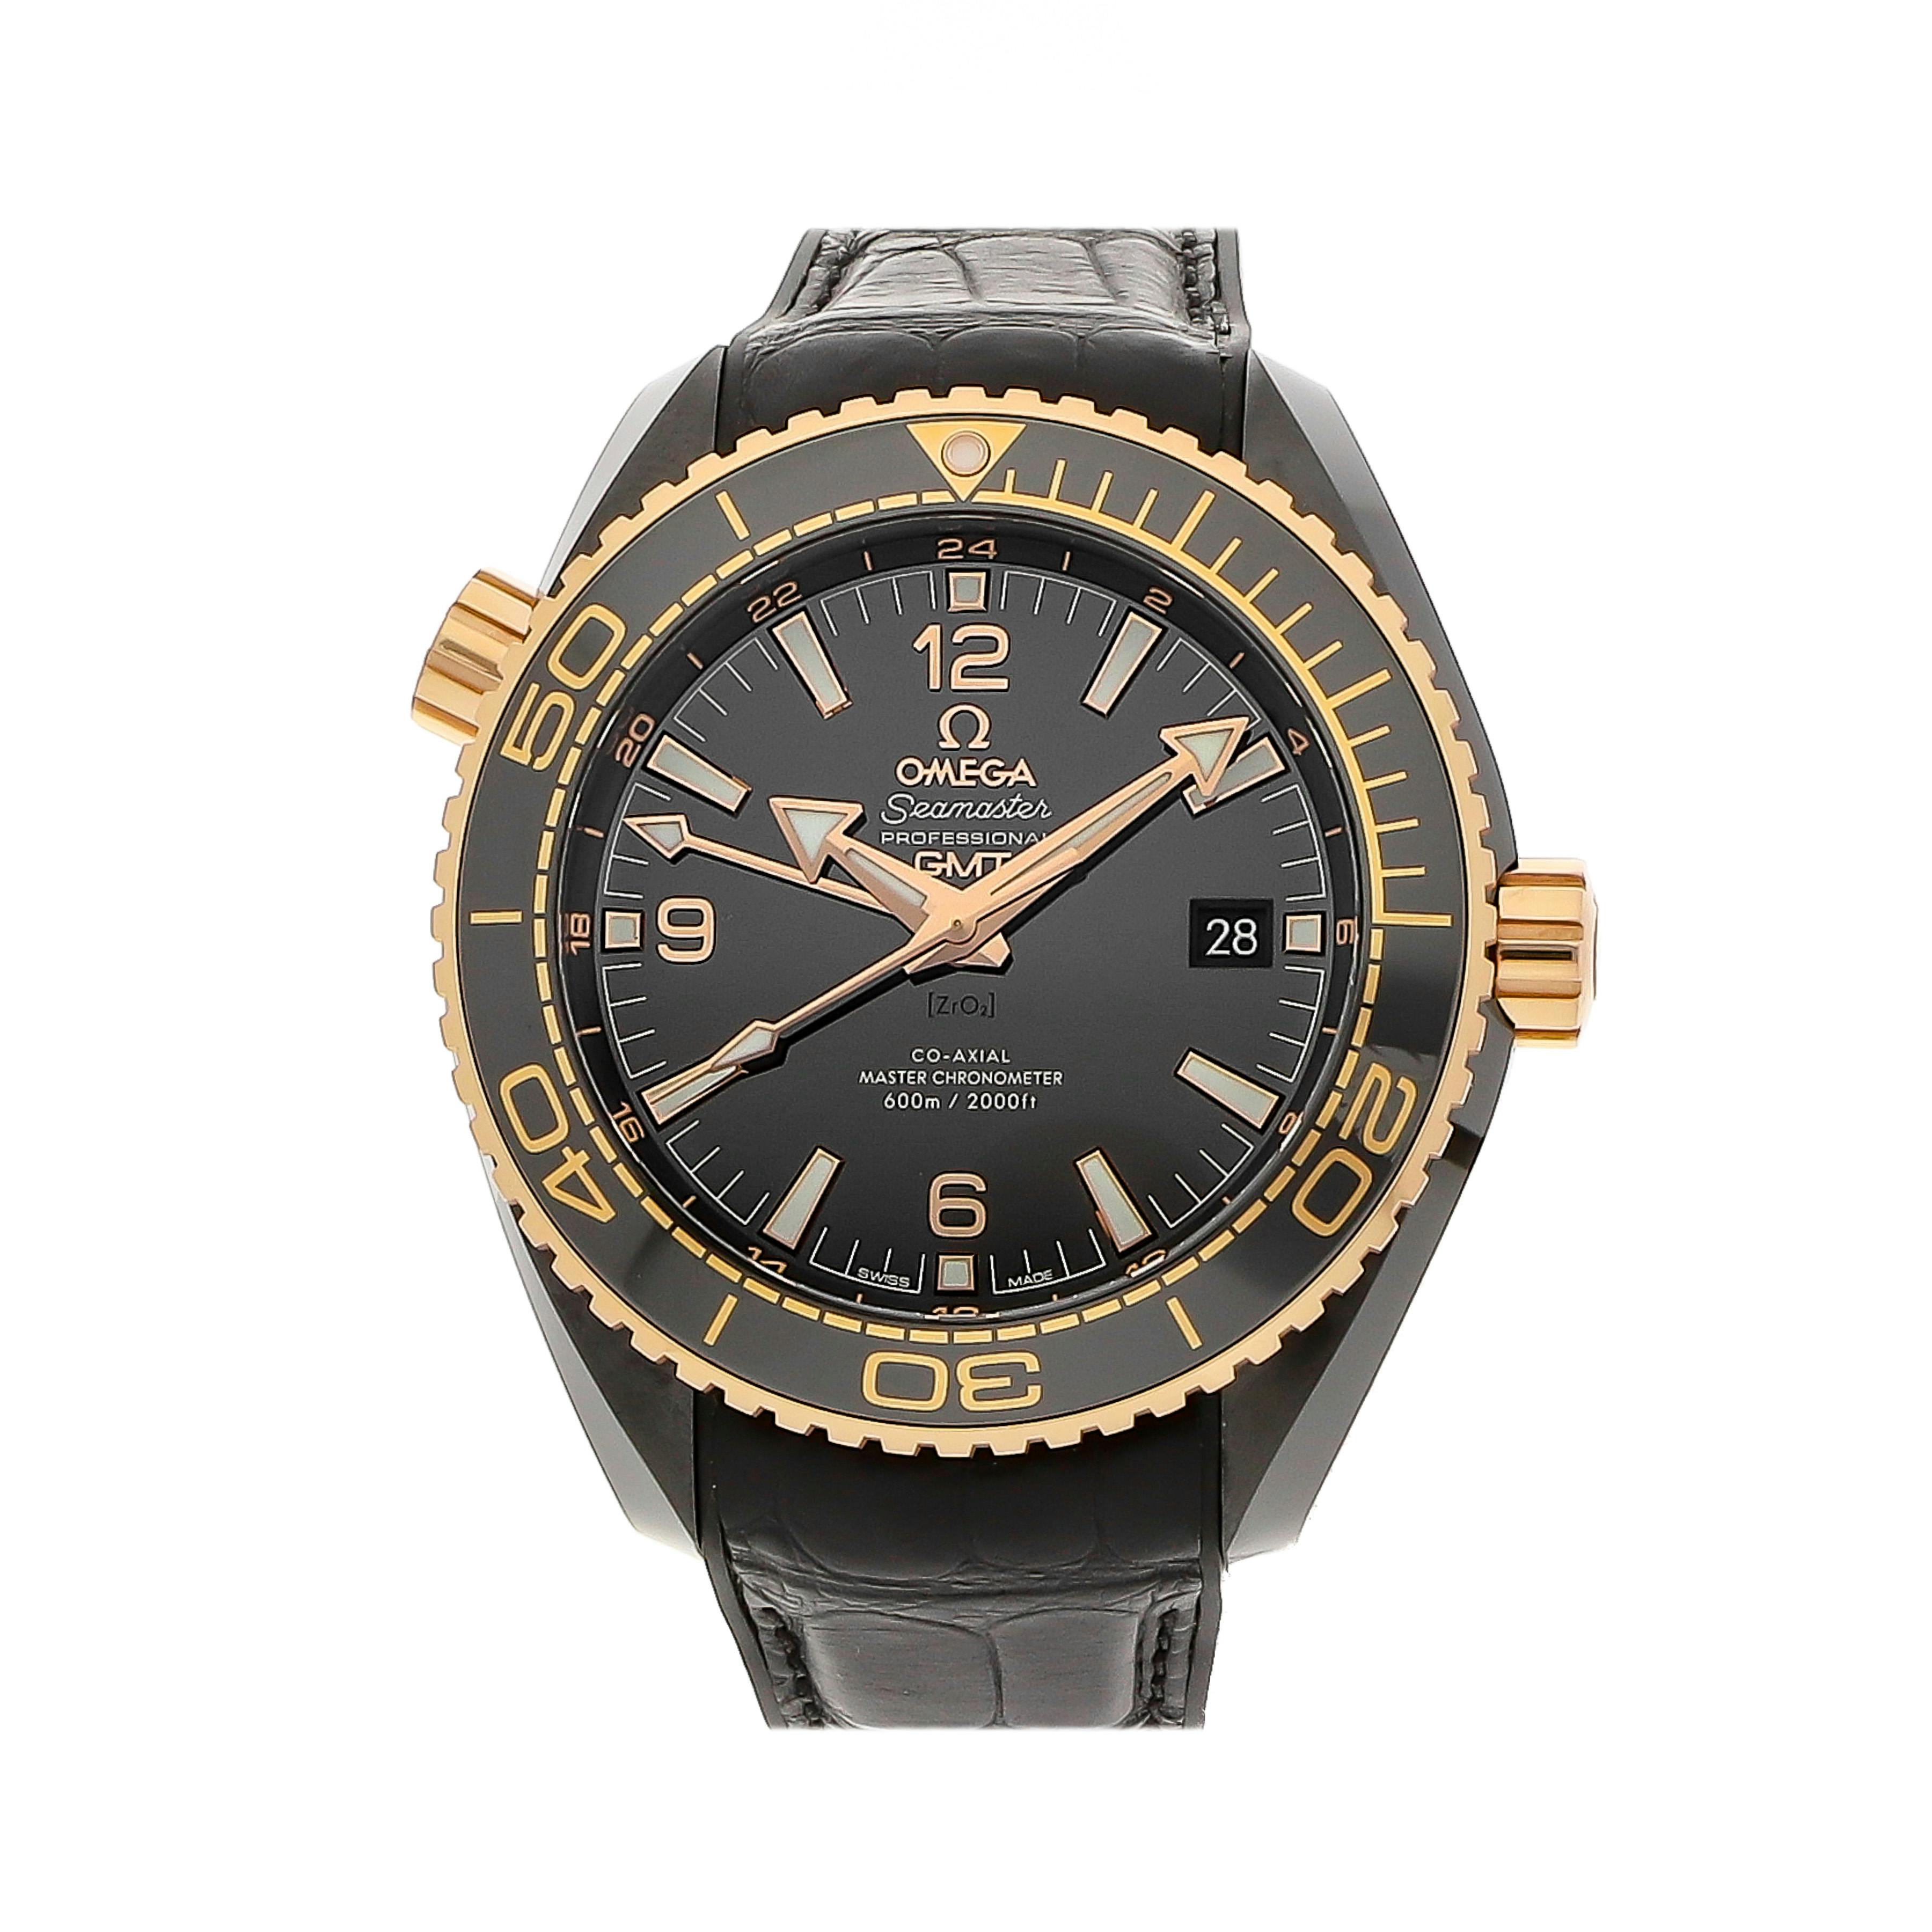 Certified Pre-Owned Omega Seamaster Watches | The 1916 Company